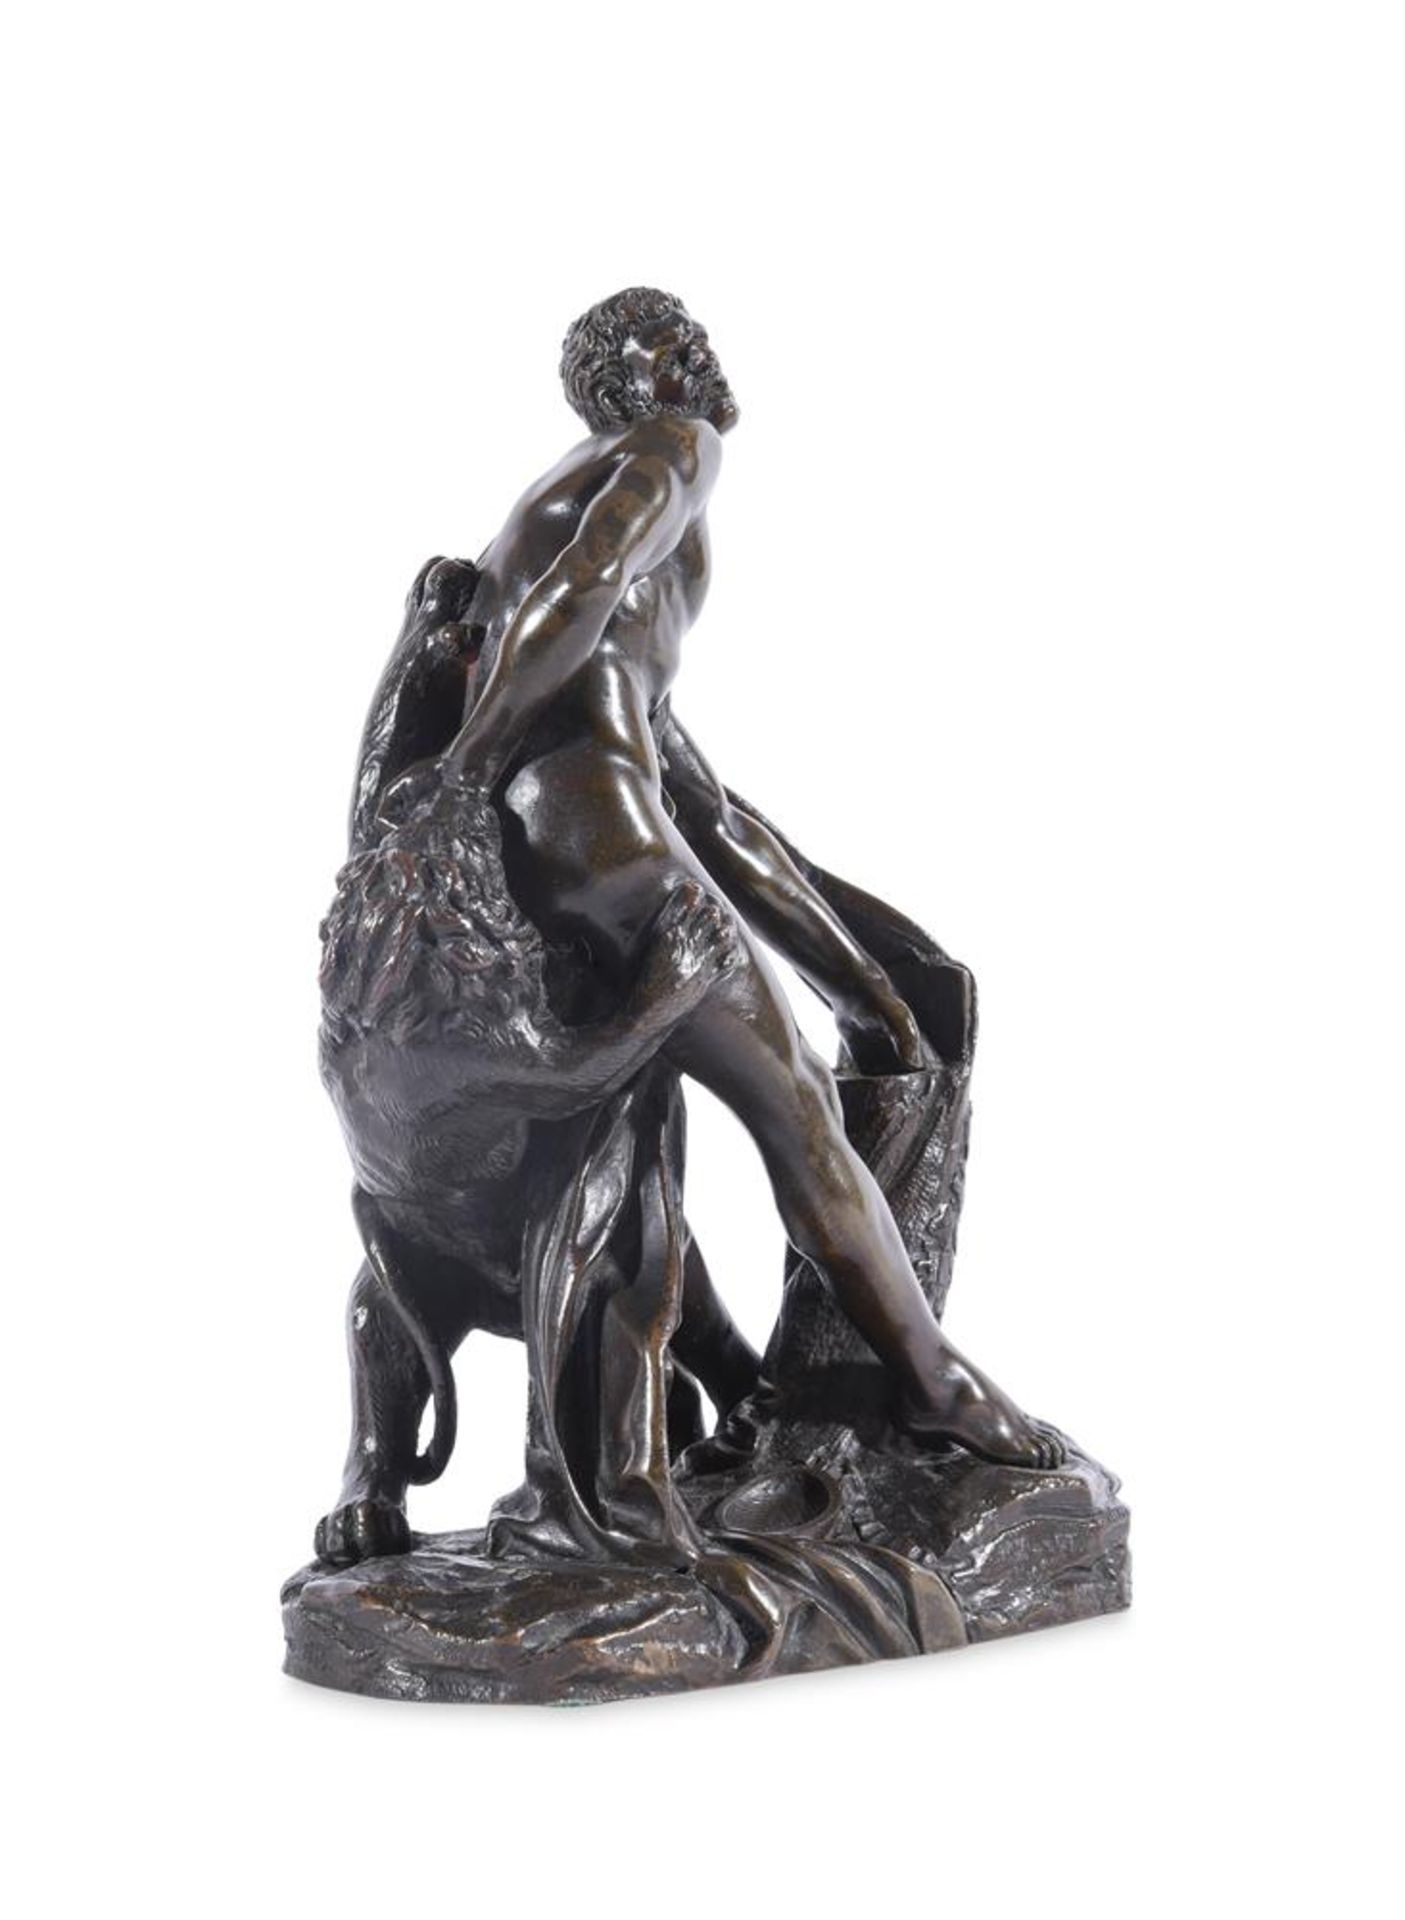 AFTER PIERRE PUGET, A BRONZE FIGURE OF MILO OF CROTON DEVOURED BY LION, LATE 19TH CENTURY - Image 2 of 4